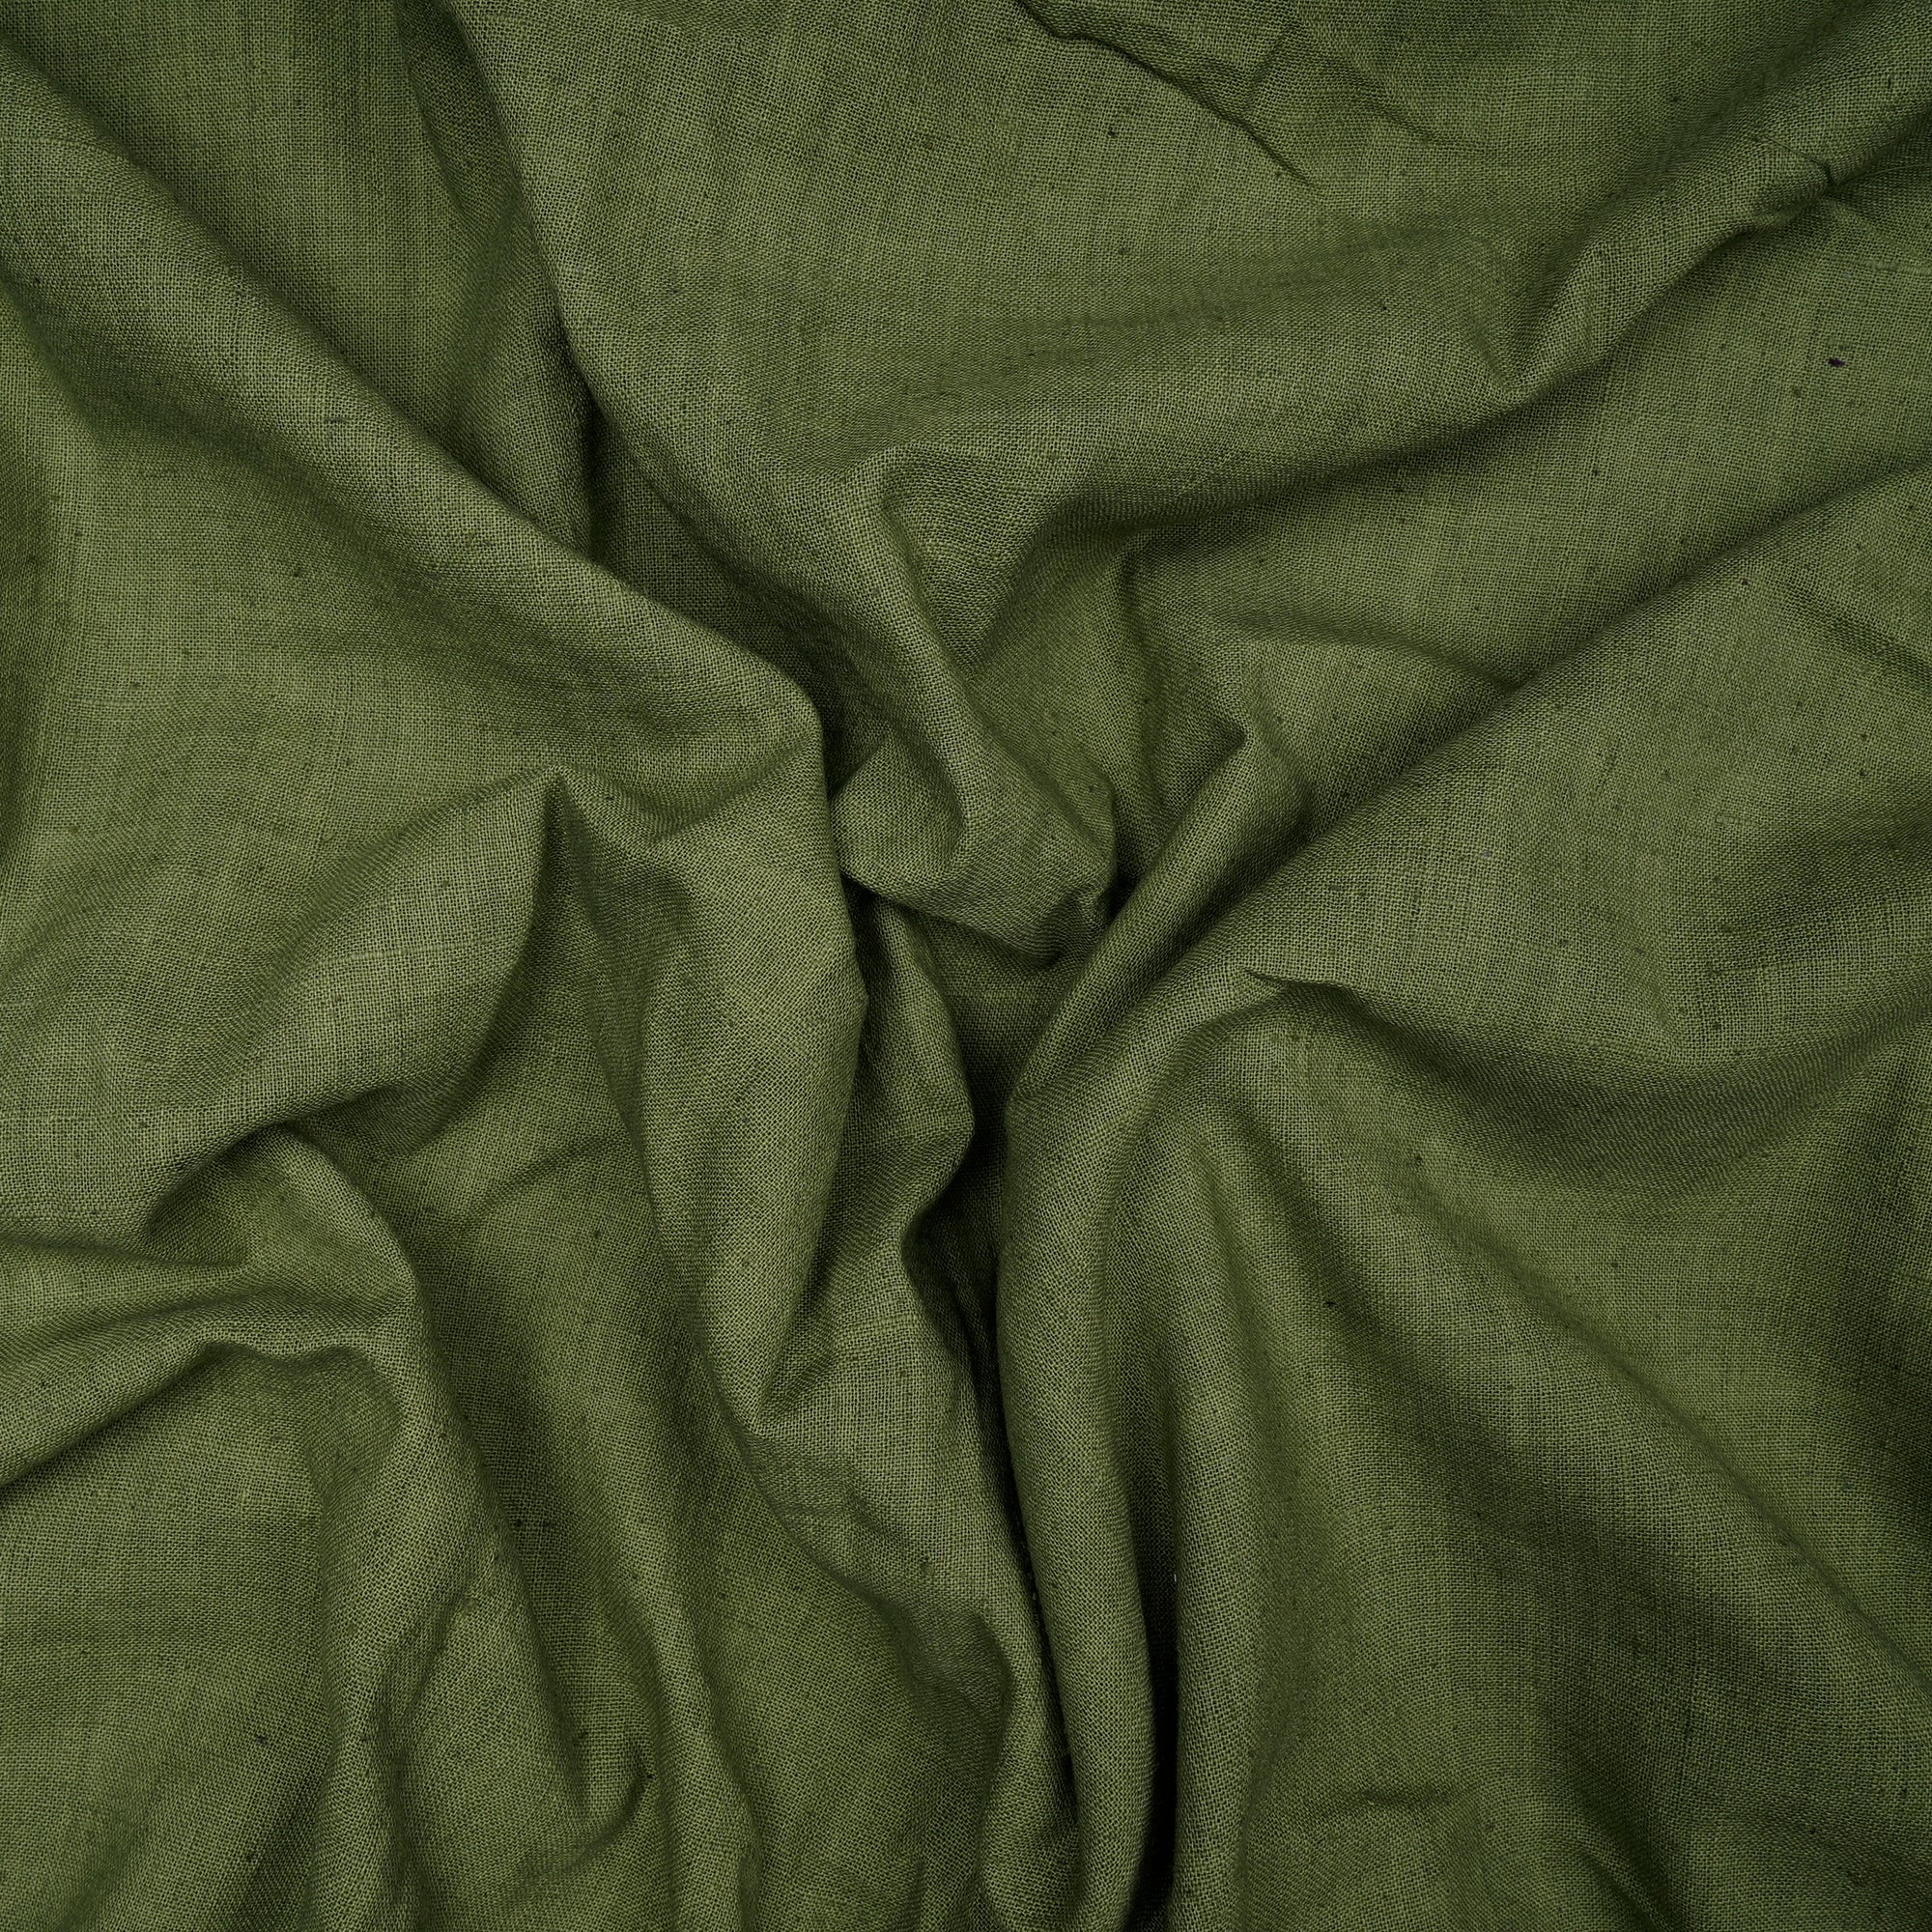 Meadow Green 40's Count Piece Dyed Handspun Handwoven Cotton Fabric